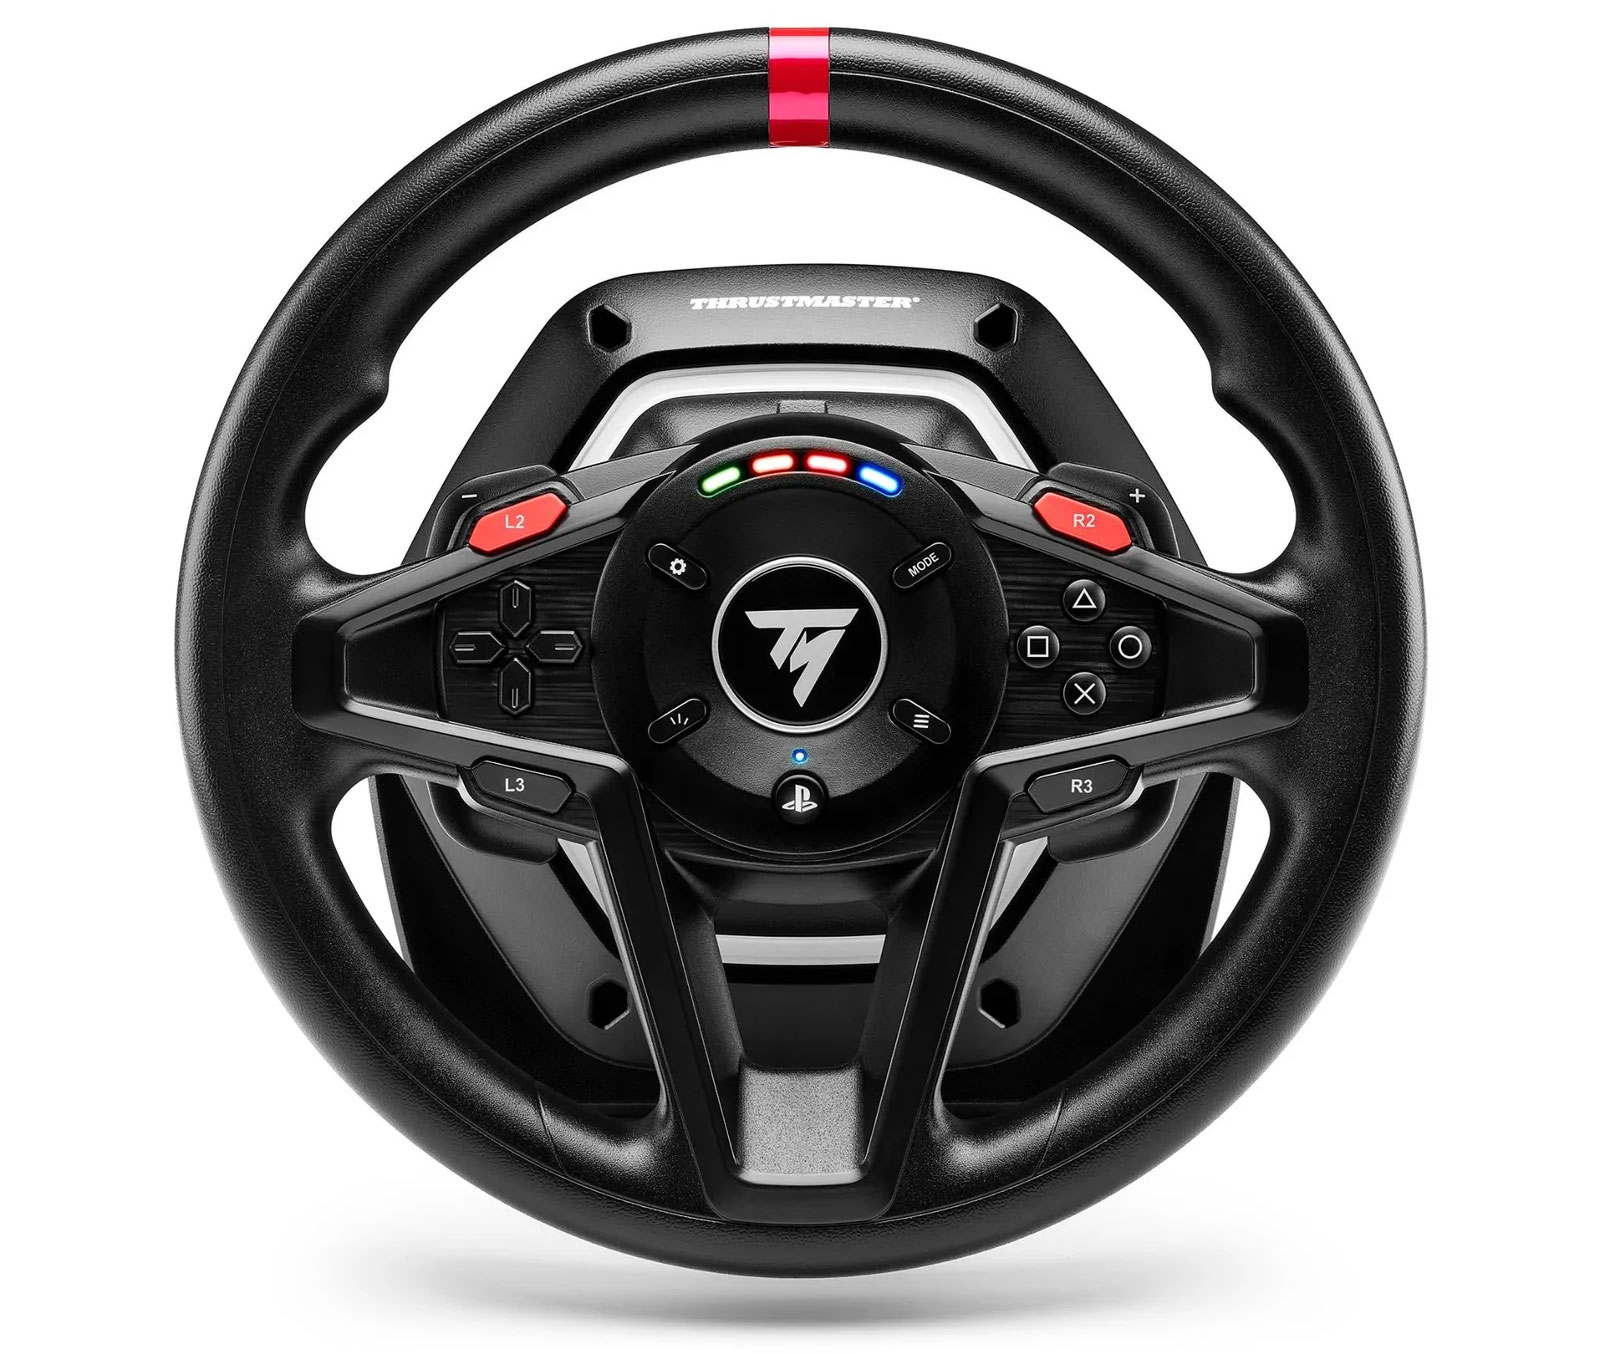 Thrustmaster T128 Review - The Perfect Wheel For Beginners? 